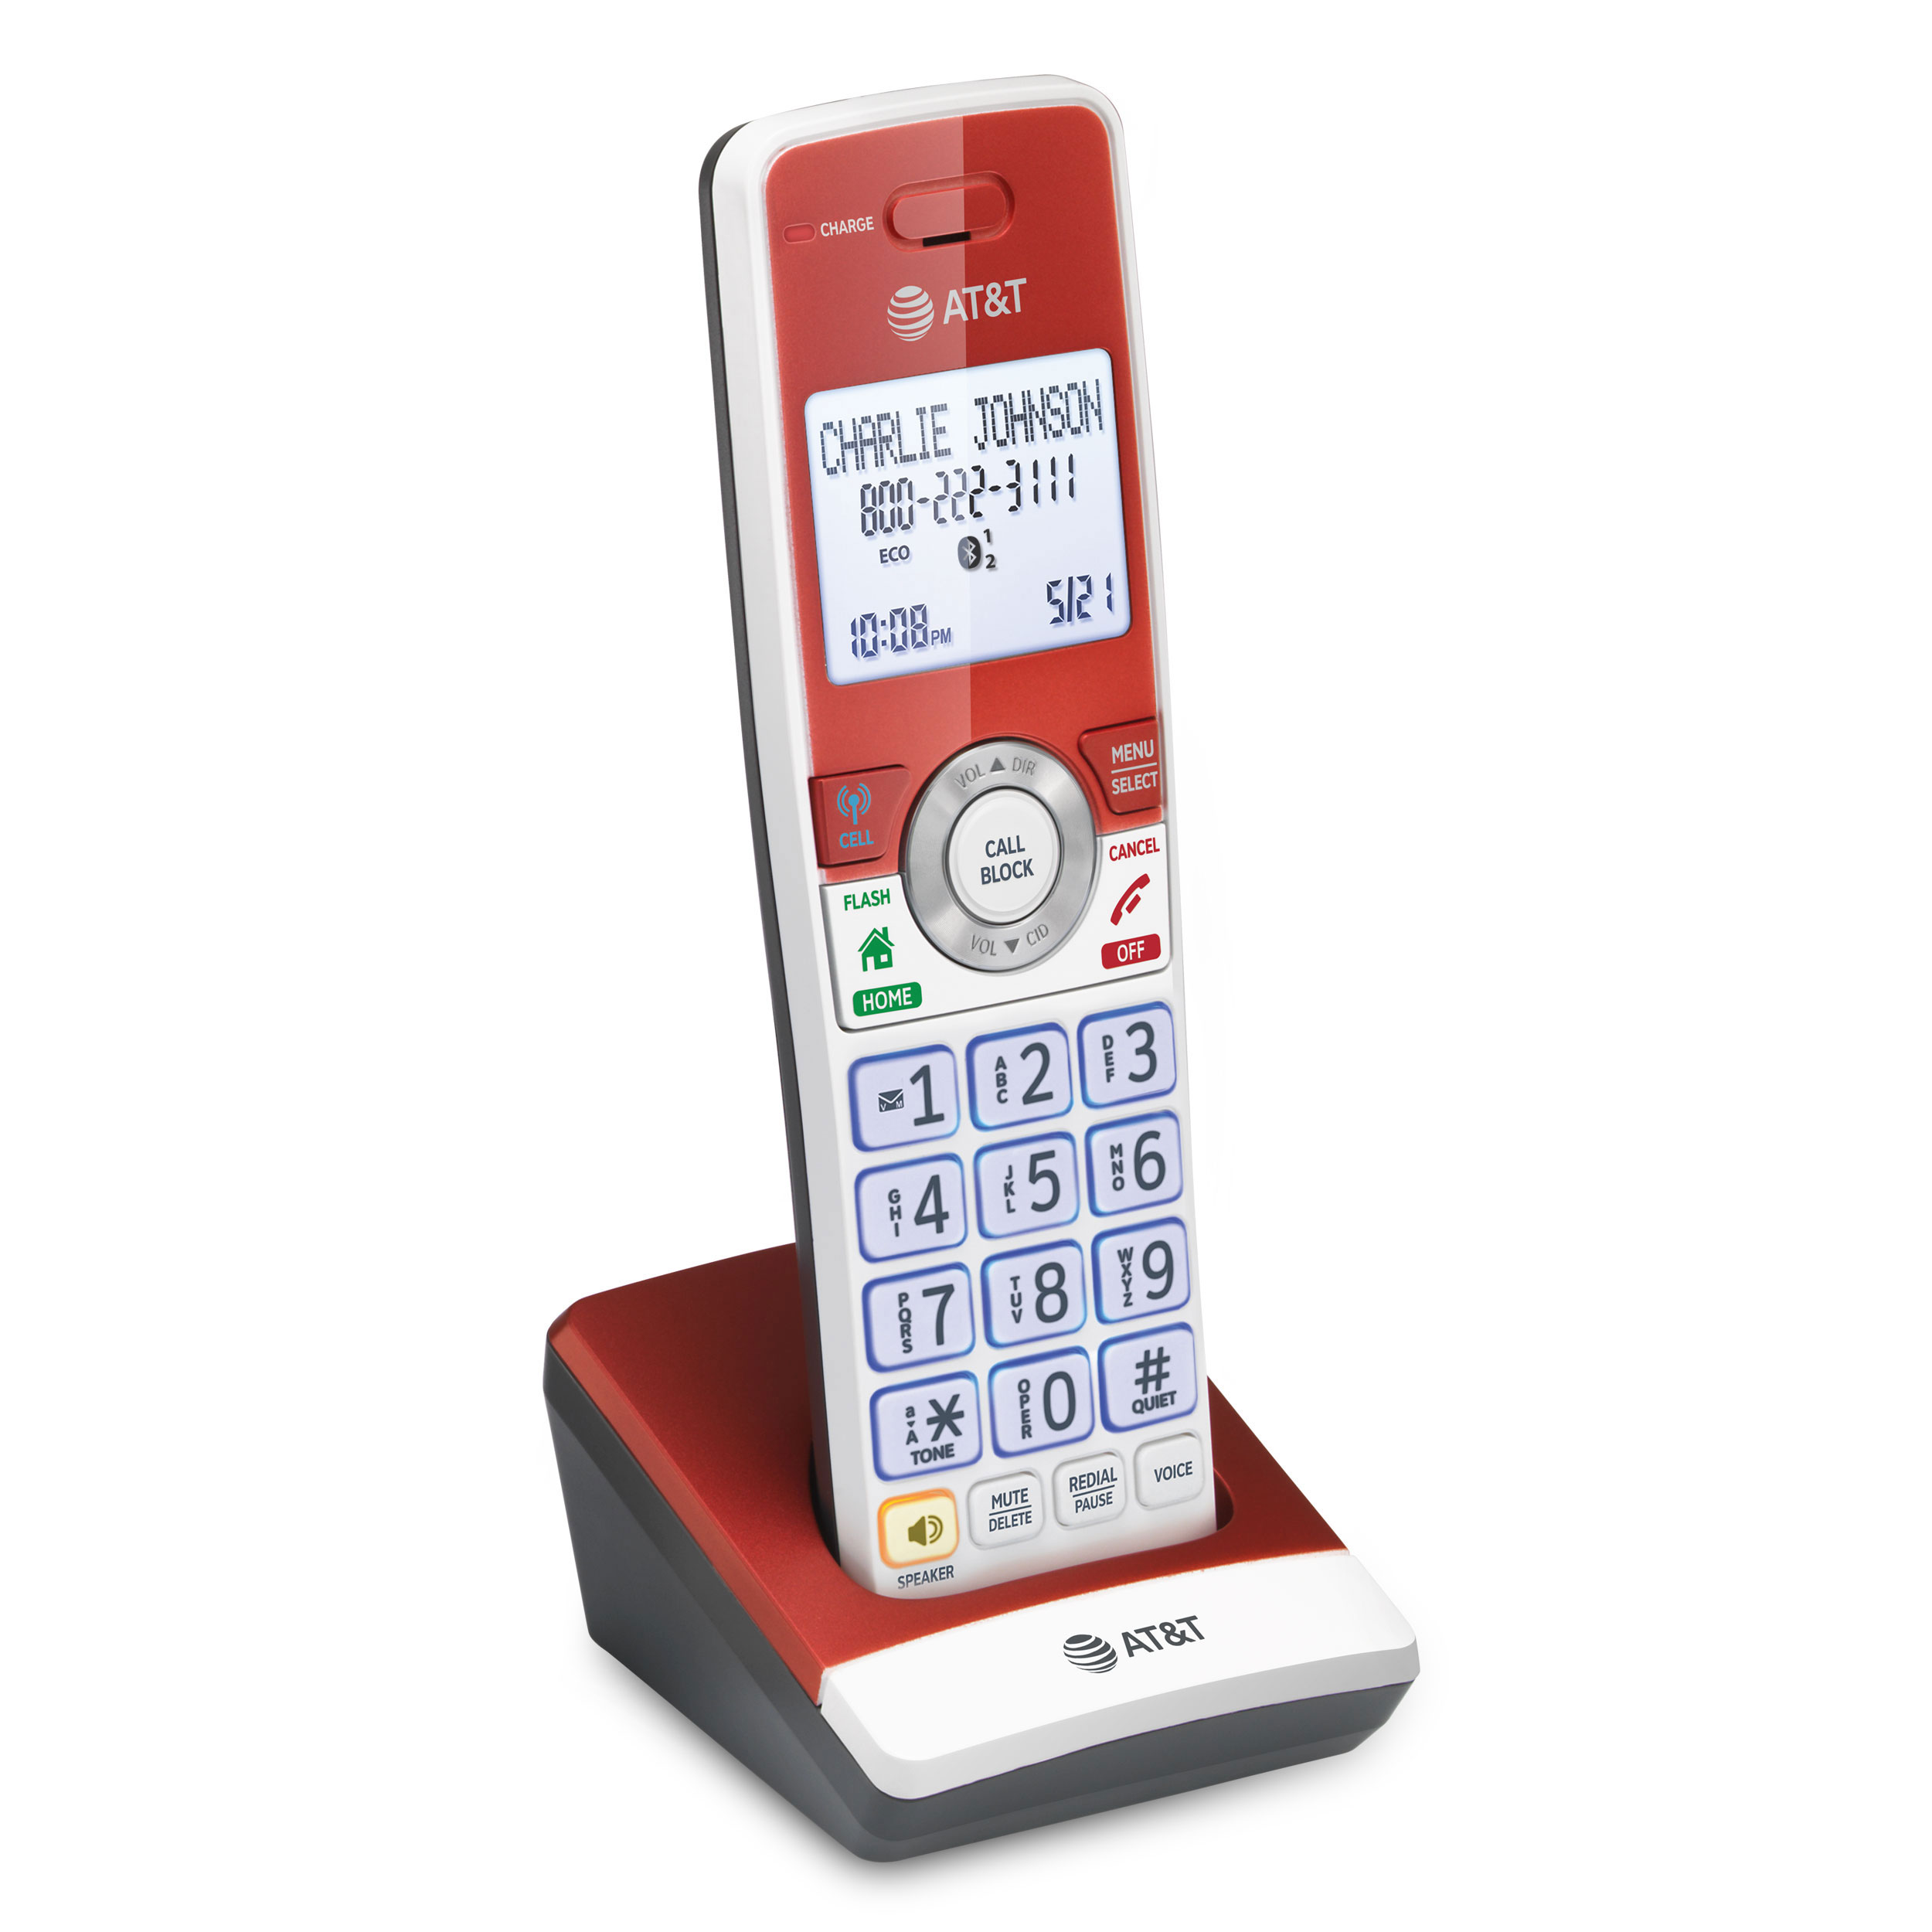 Accessory Handset with Unsurpassed Range, Bluetooth Connect to Cell, and Smart Call Blocker (Red) - view 2